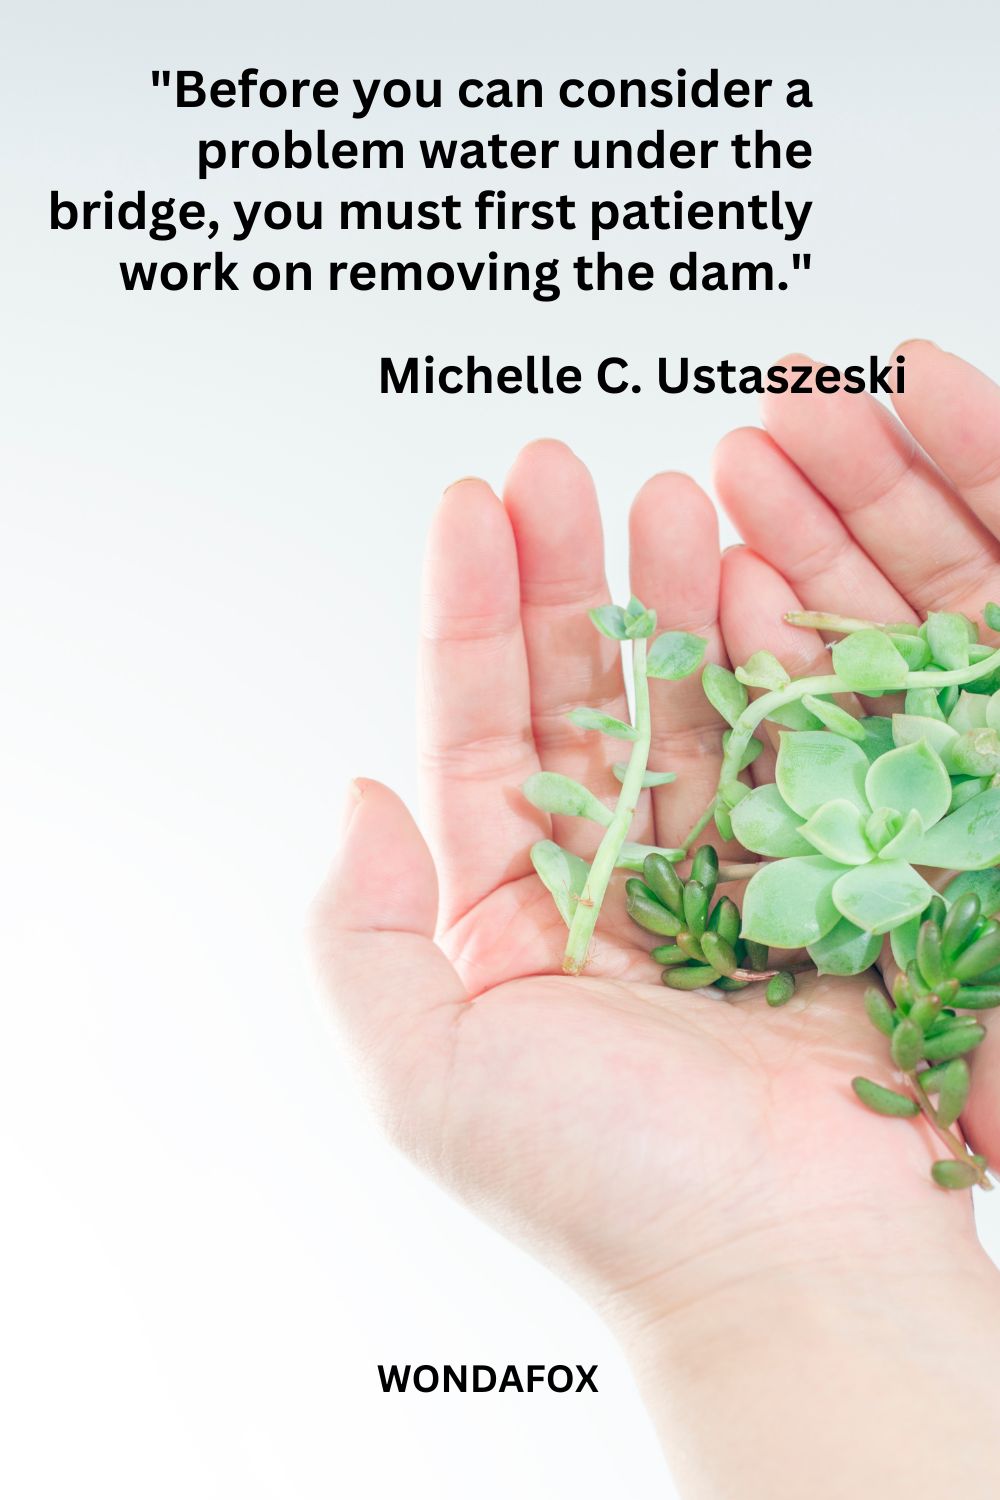 "Before you can consider a problem water under the bridge, you must first patiently work on removing the dam."
Michelle C. Ustaszeski